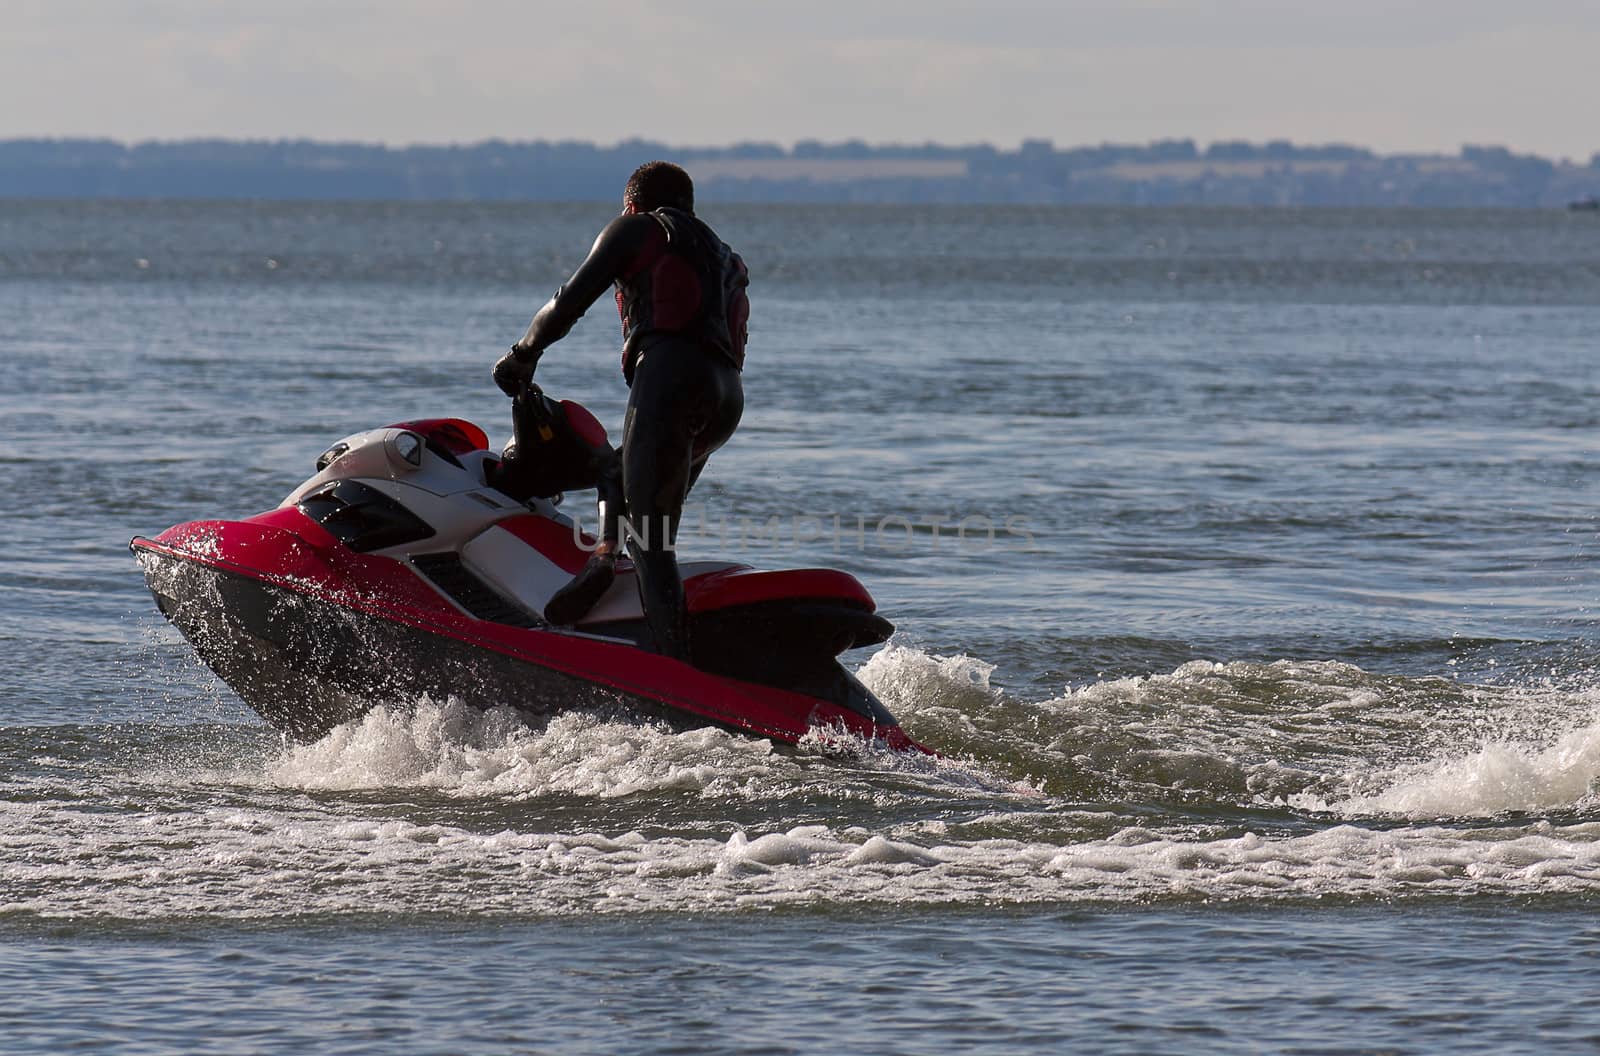 This is  man on  jet ski in  sea close-up.